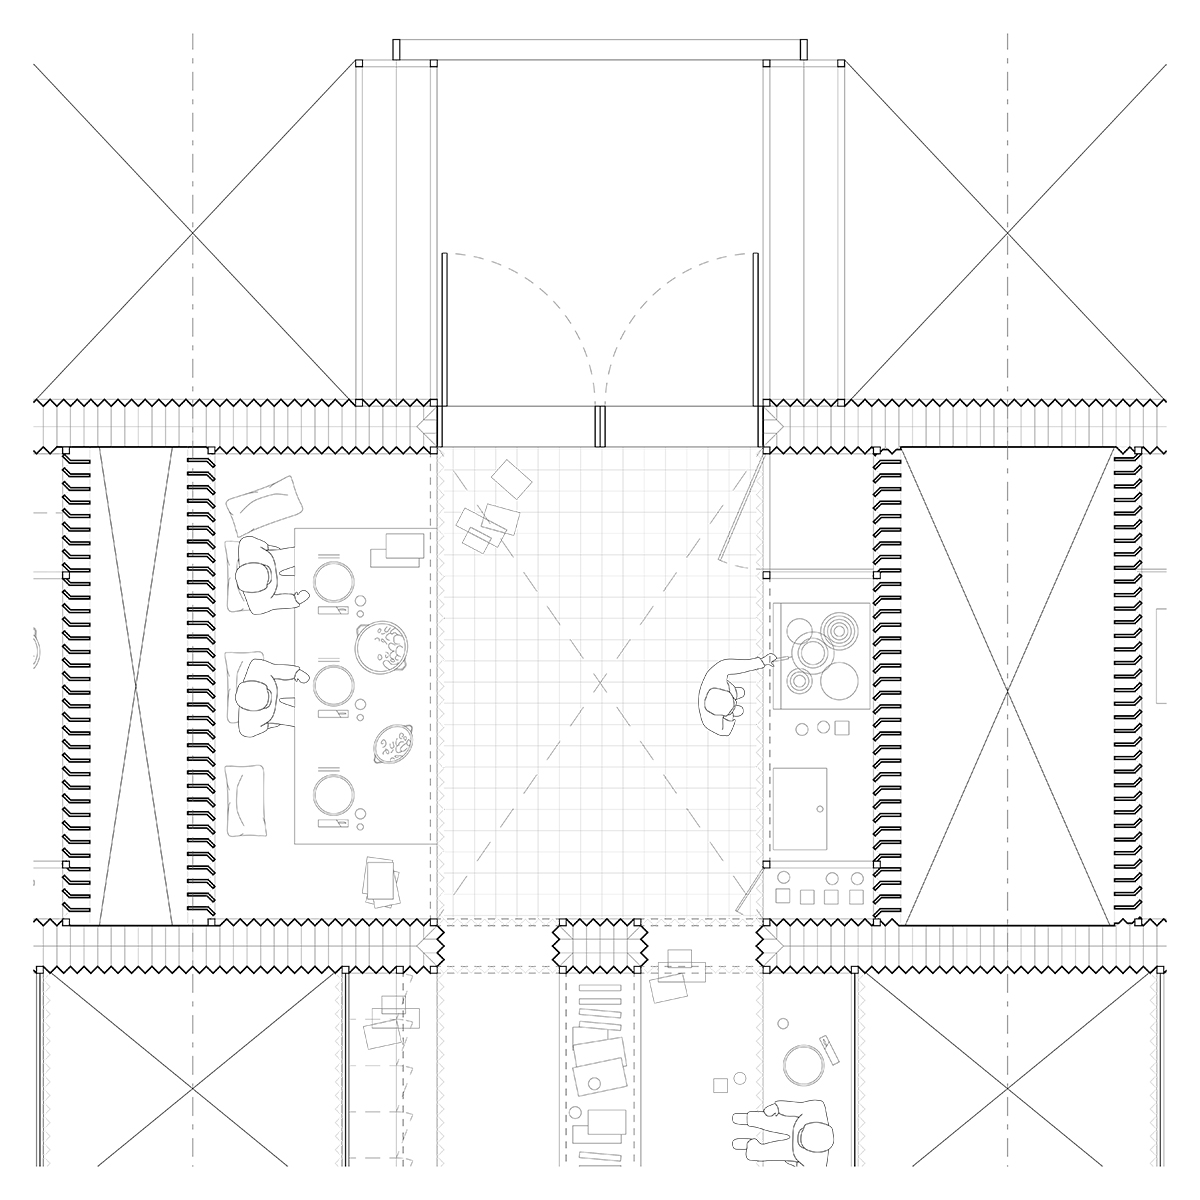 Plan of cooking and dining spaces